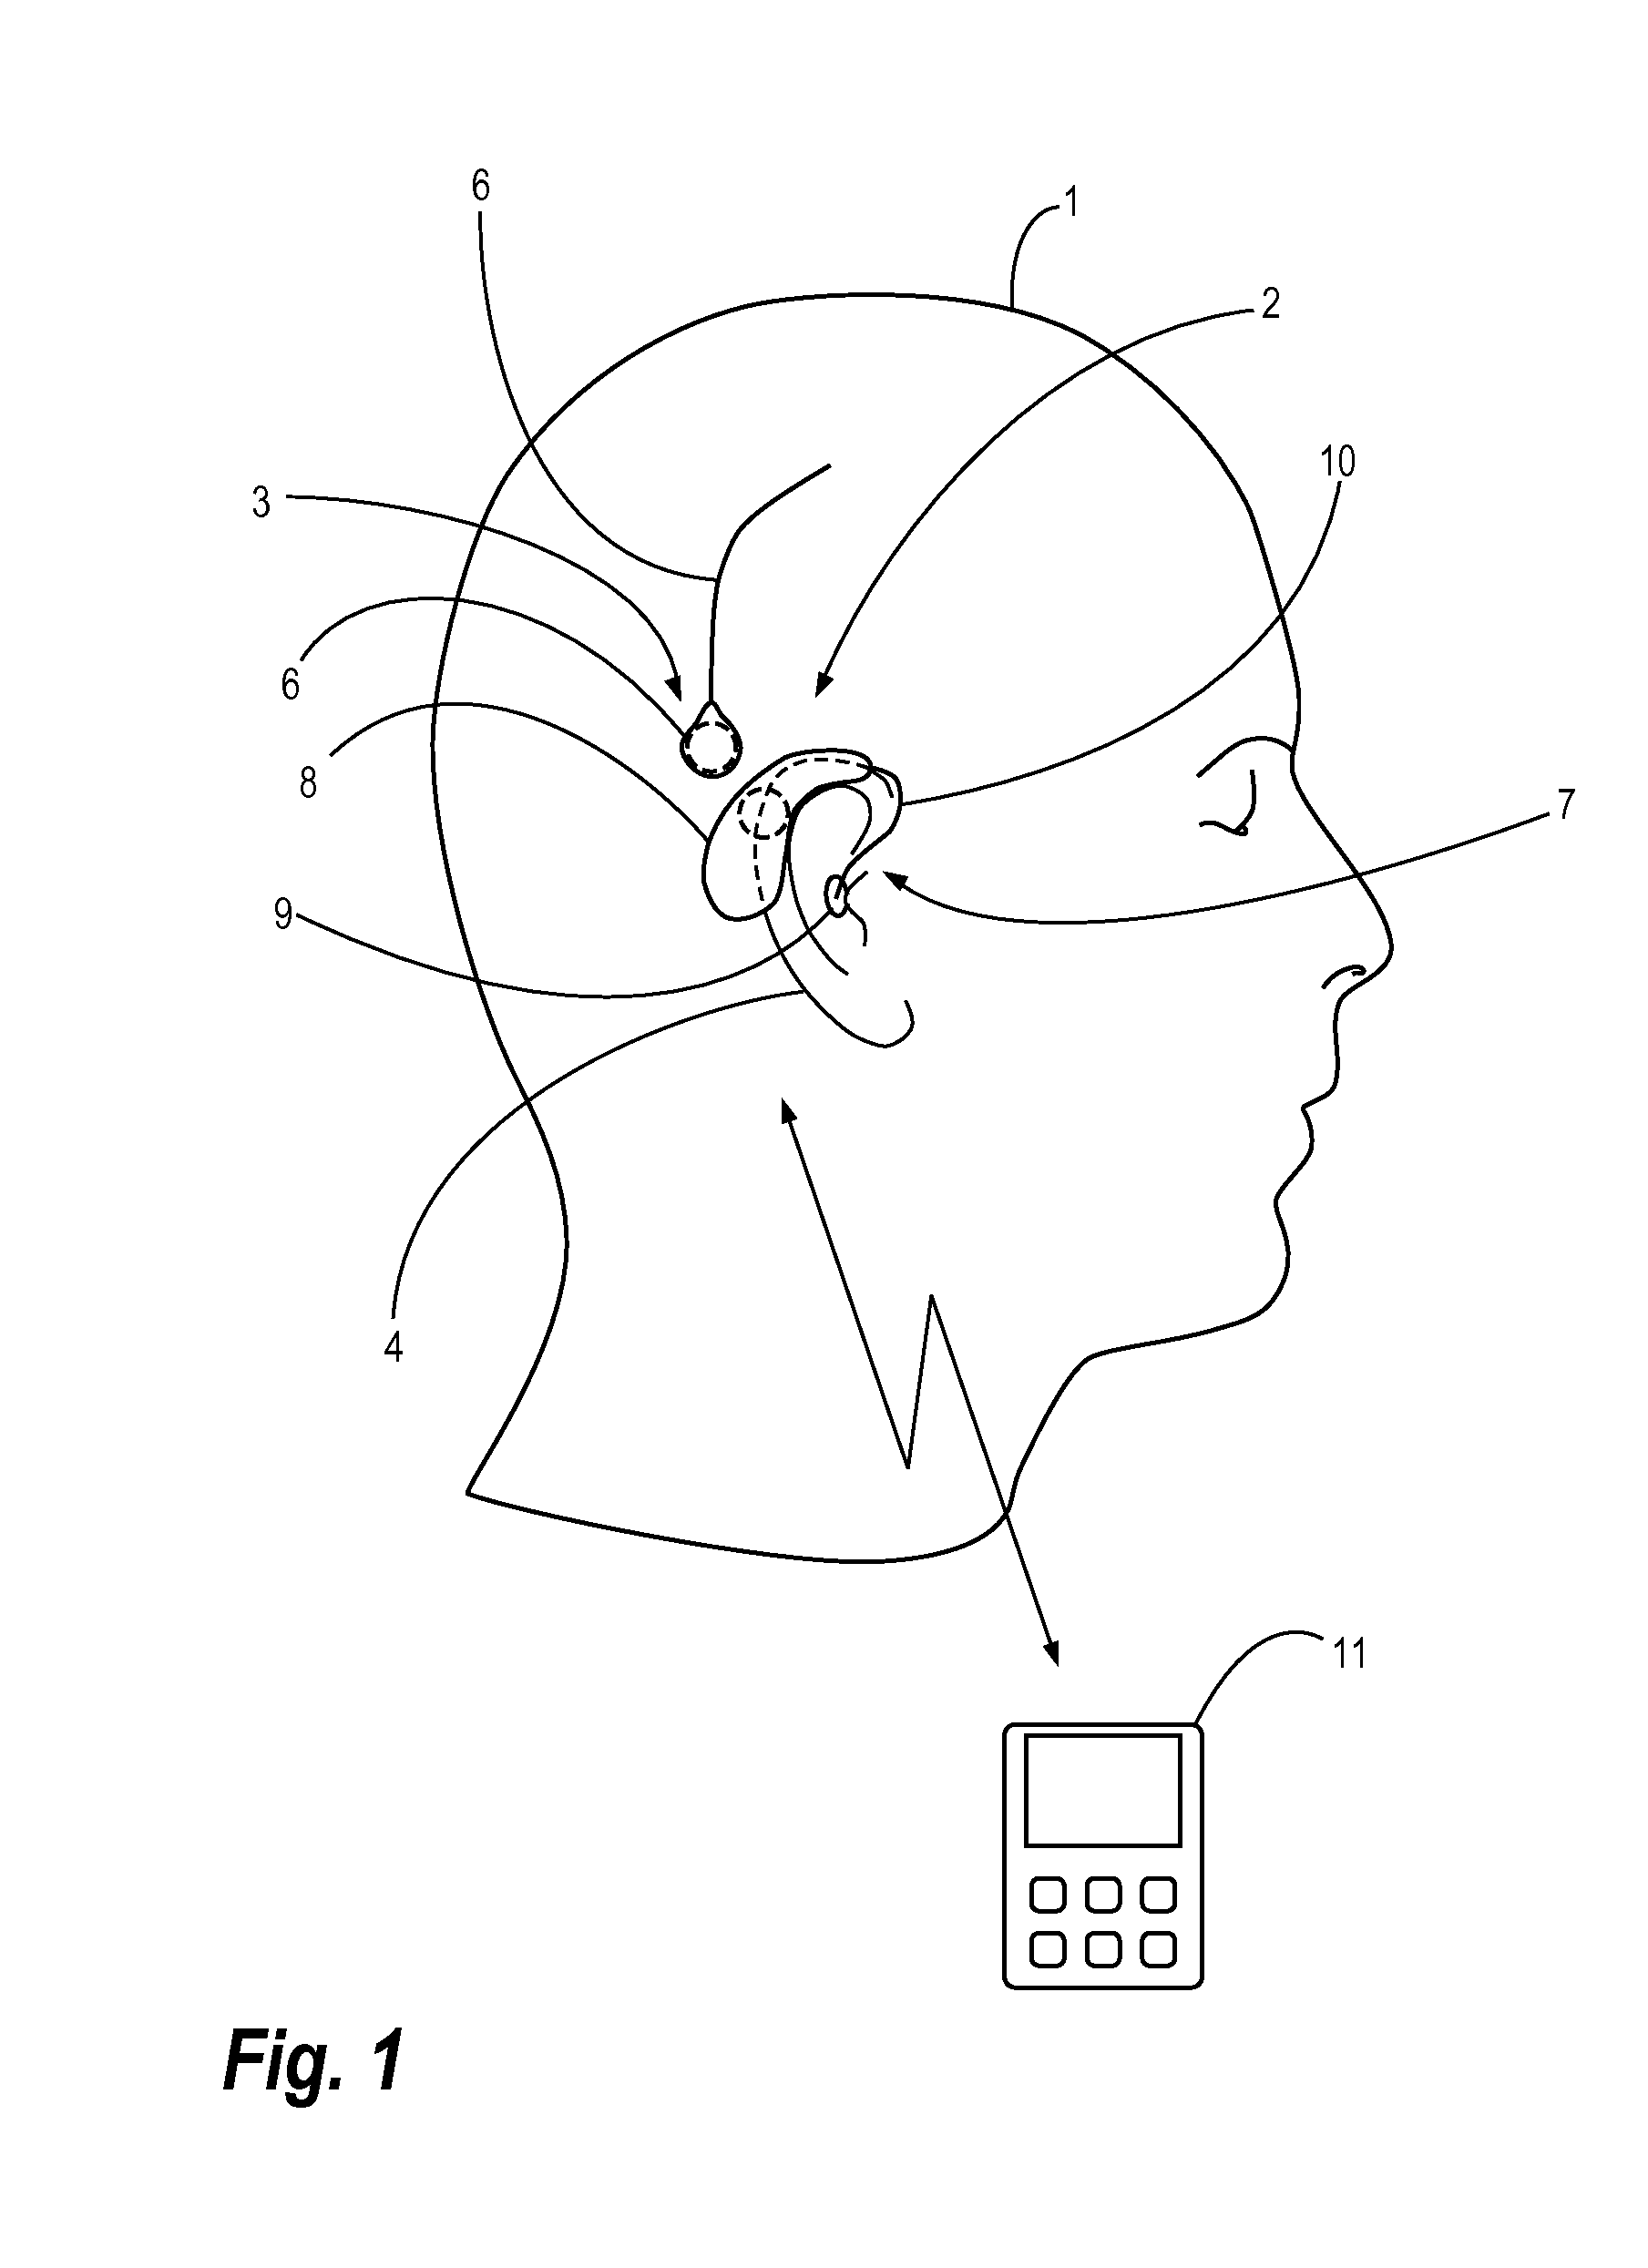 Eeg monitoring apparatus and method for presenting messages therein